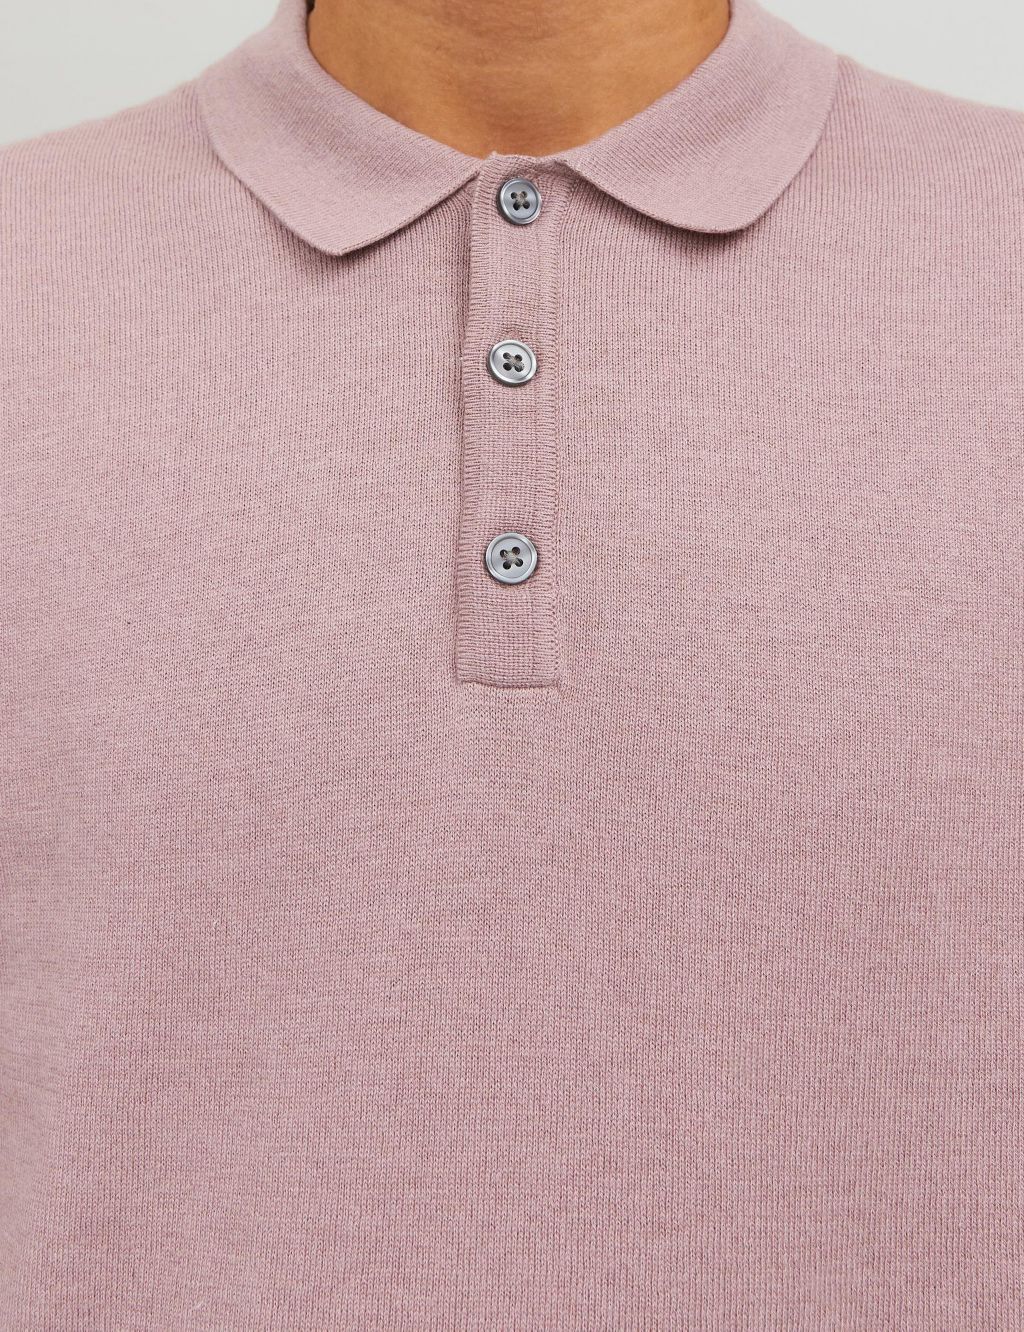 Cotton Rich Knitted Polo Shirt image 6